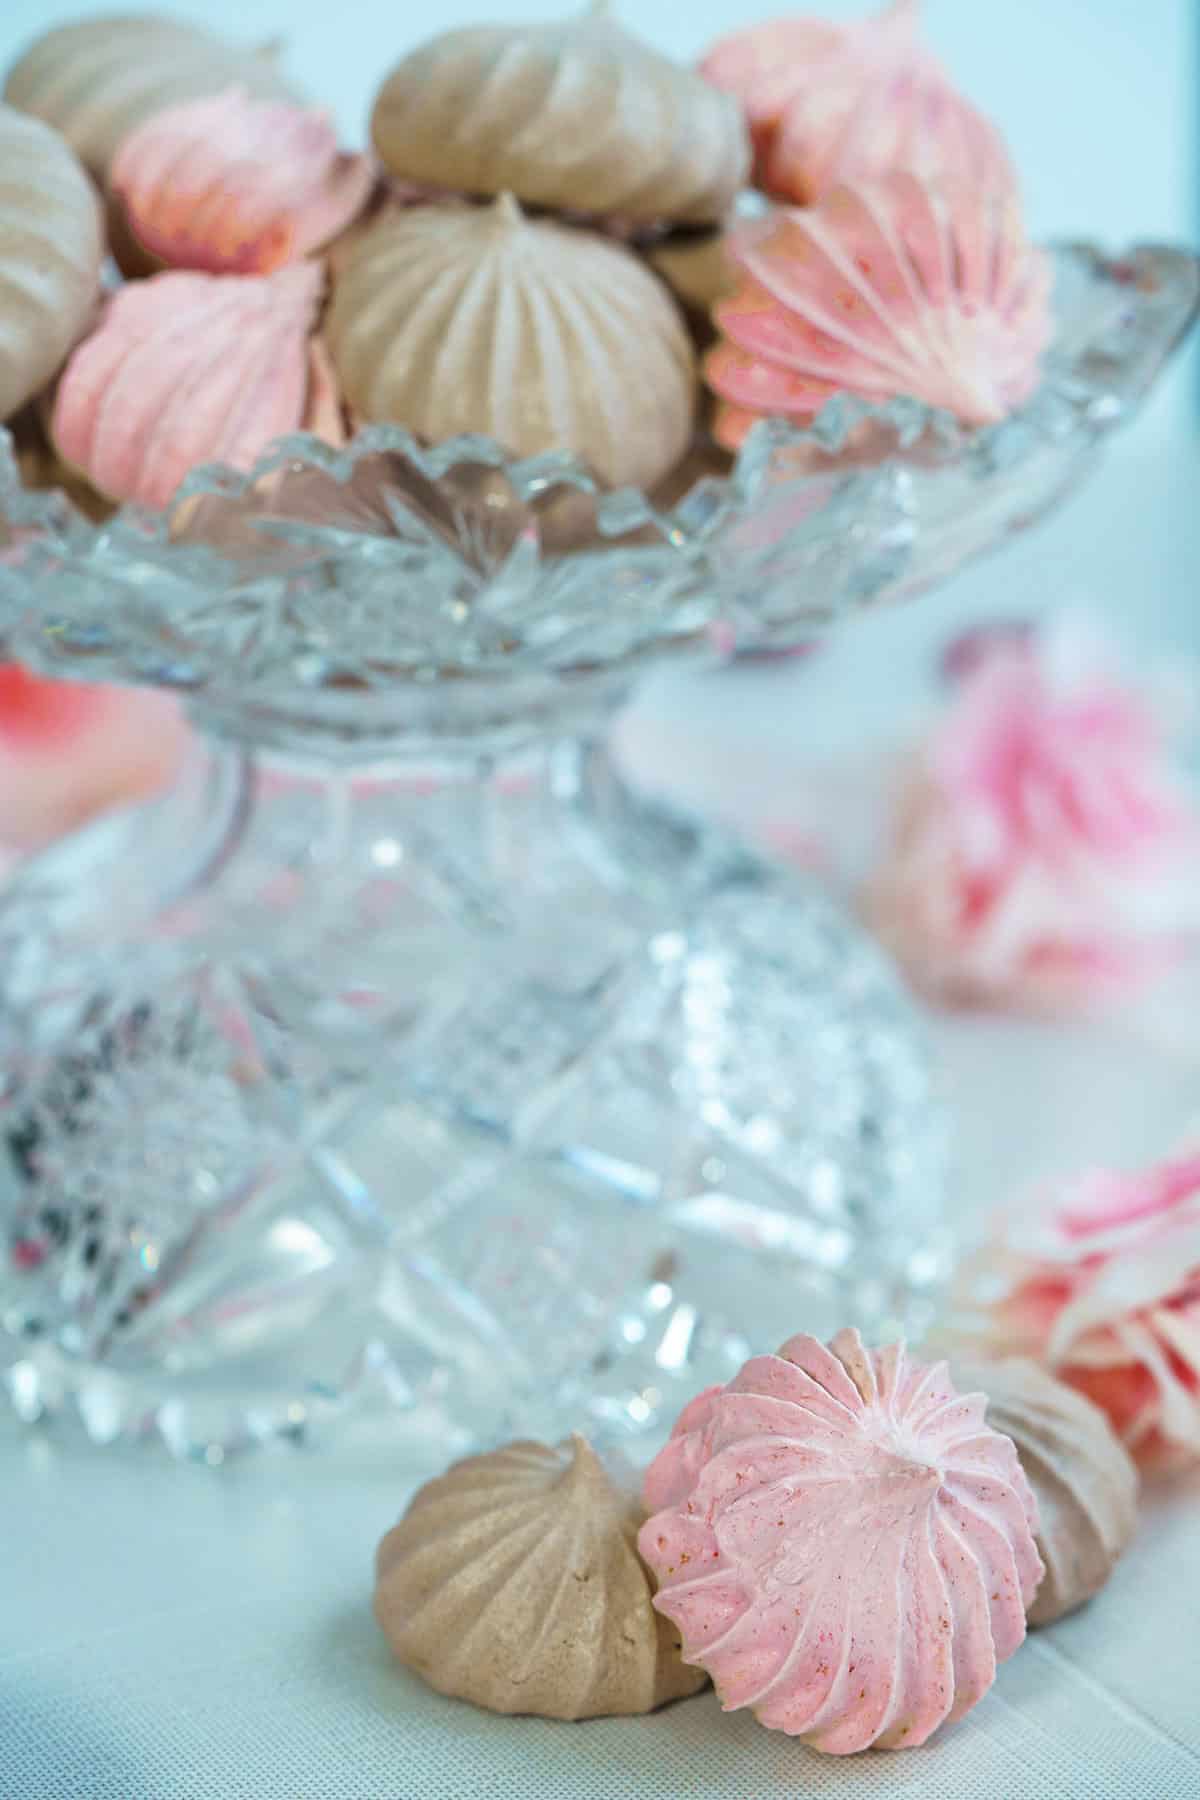 Full image of strawberry and chocolate meringue cookies.